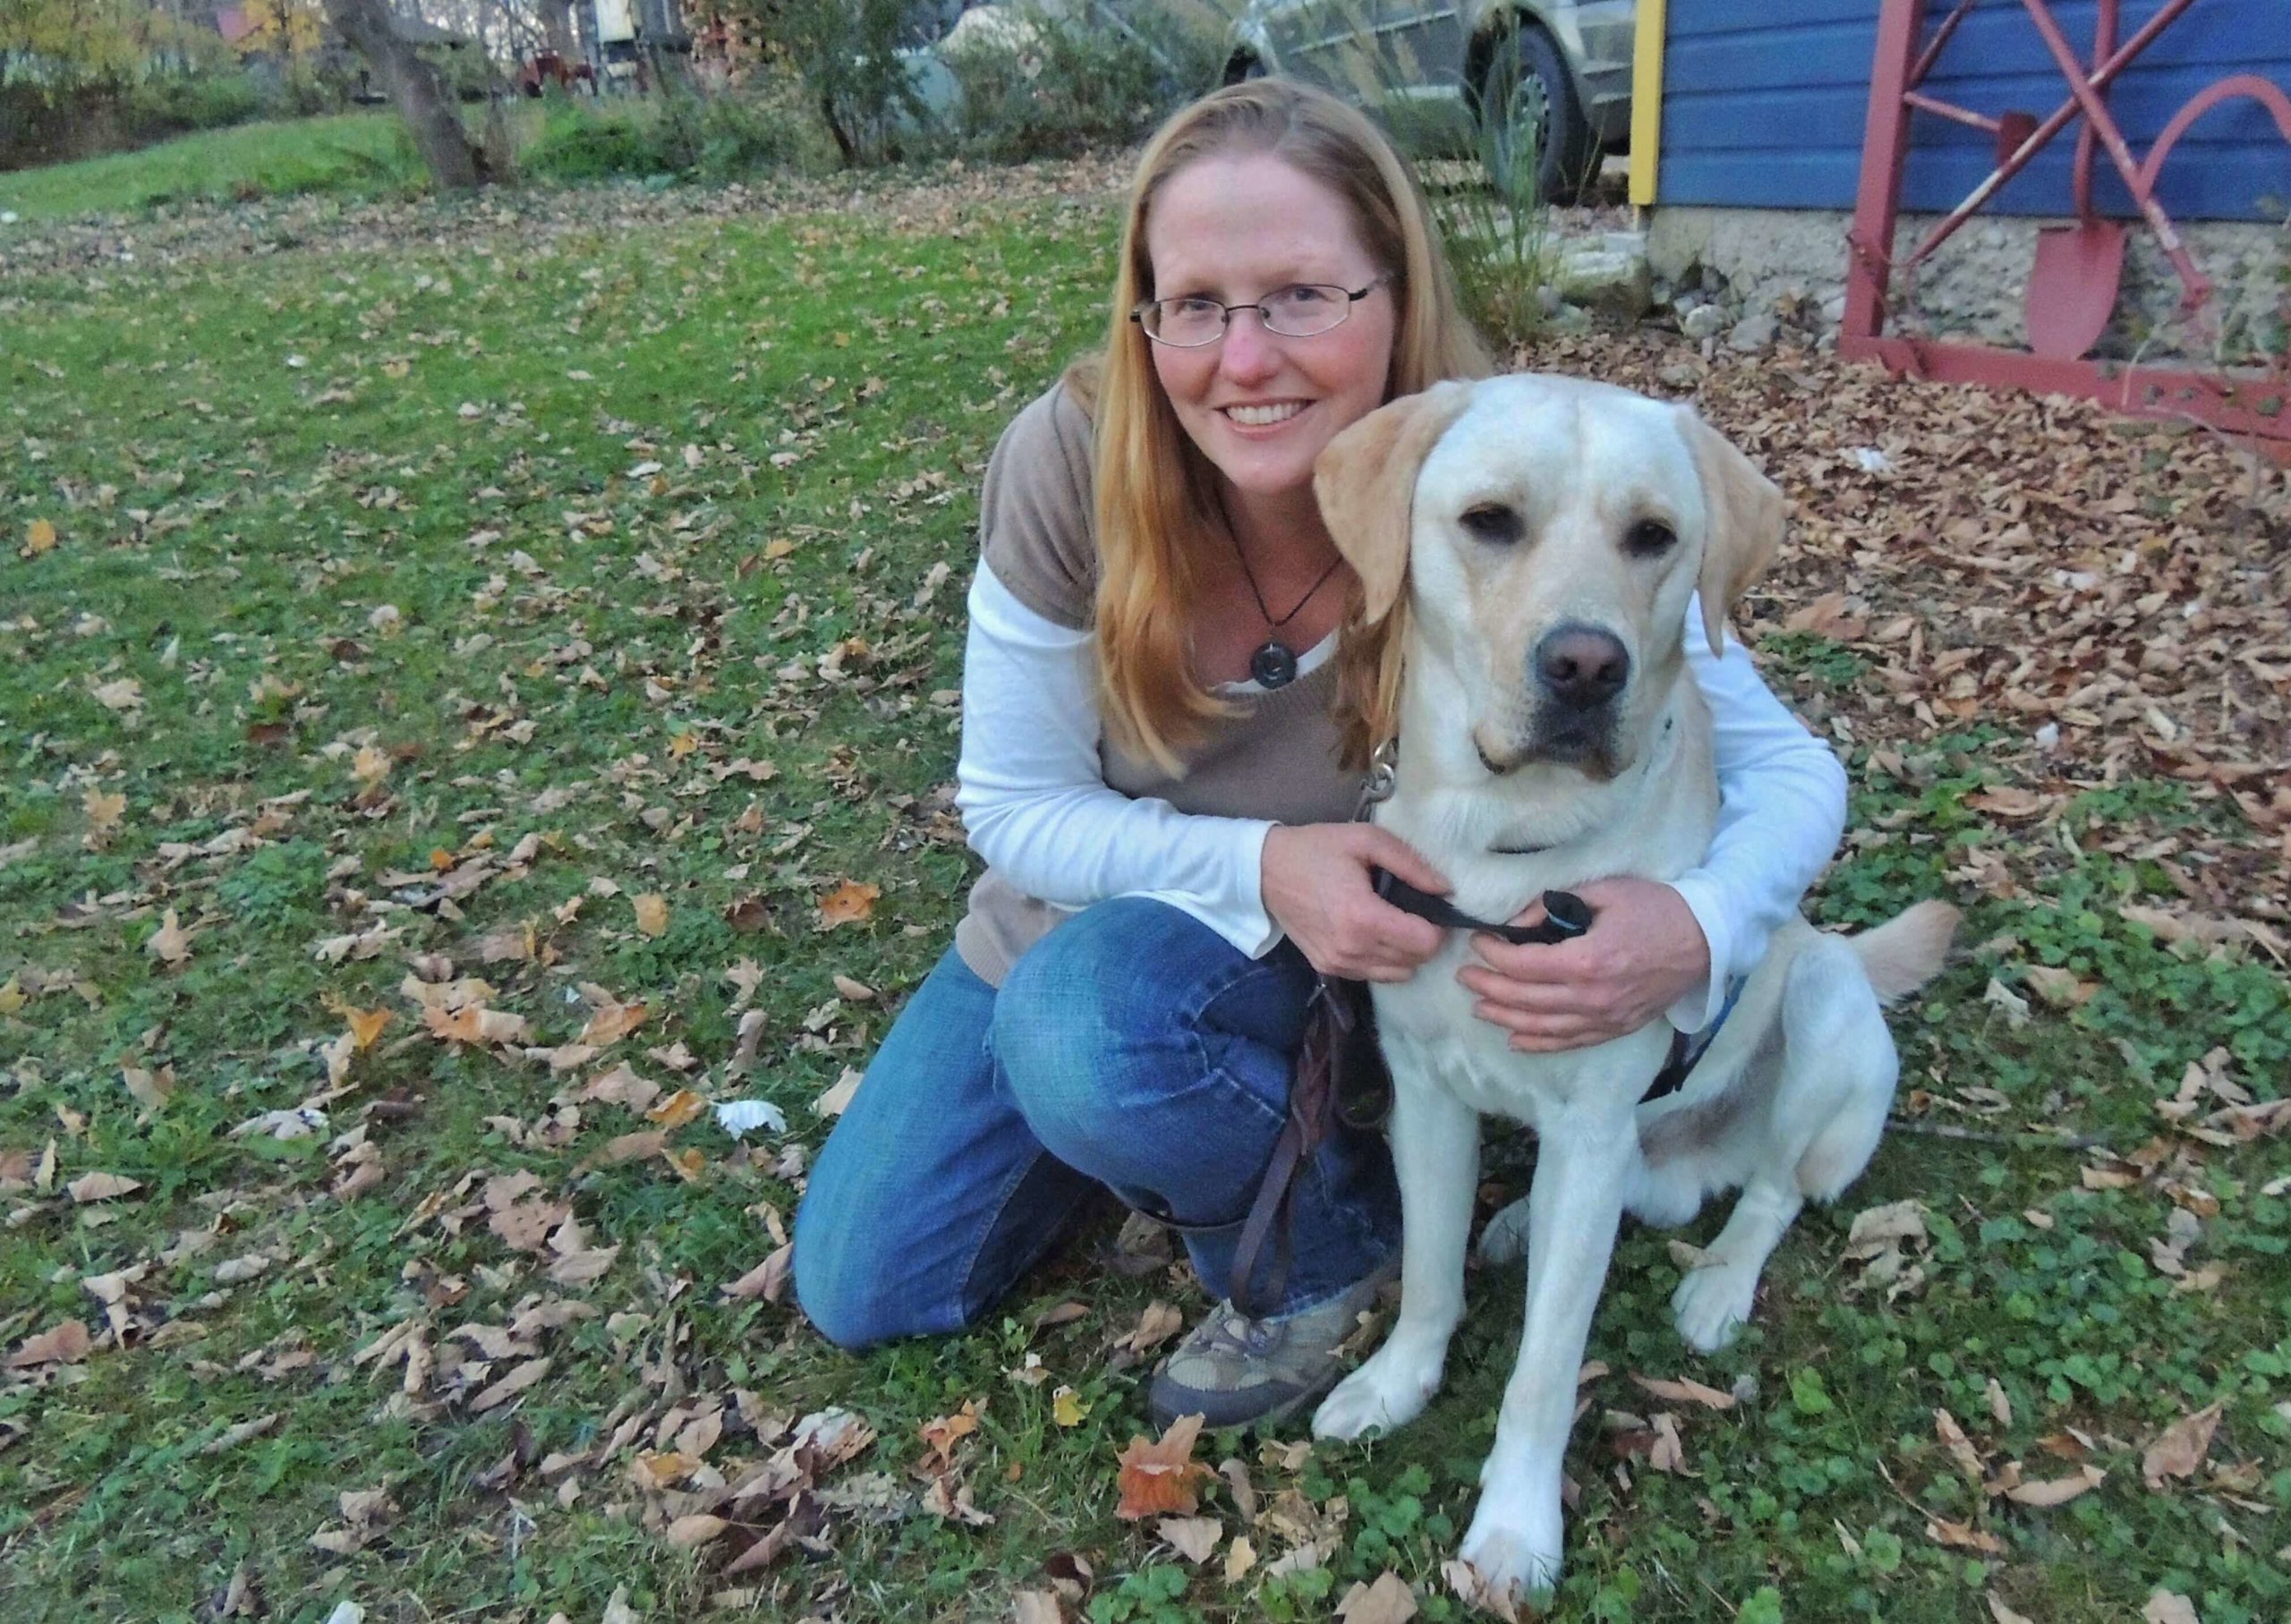 Tara kneels in the grass with her arms around a sitting yellow lab named Nacho.